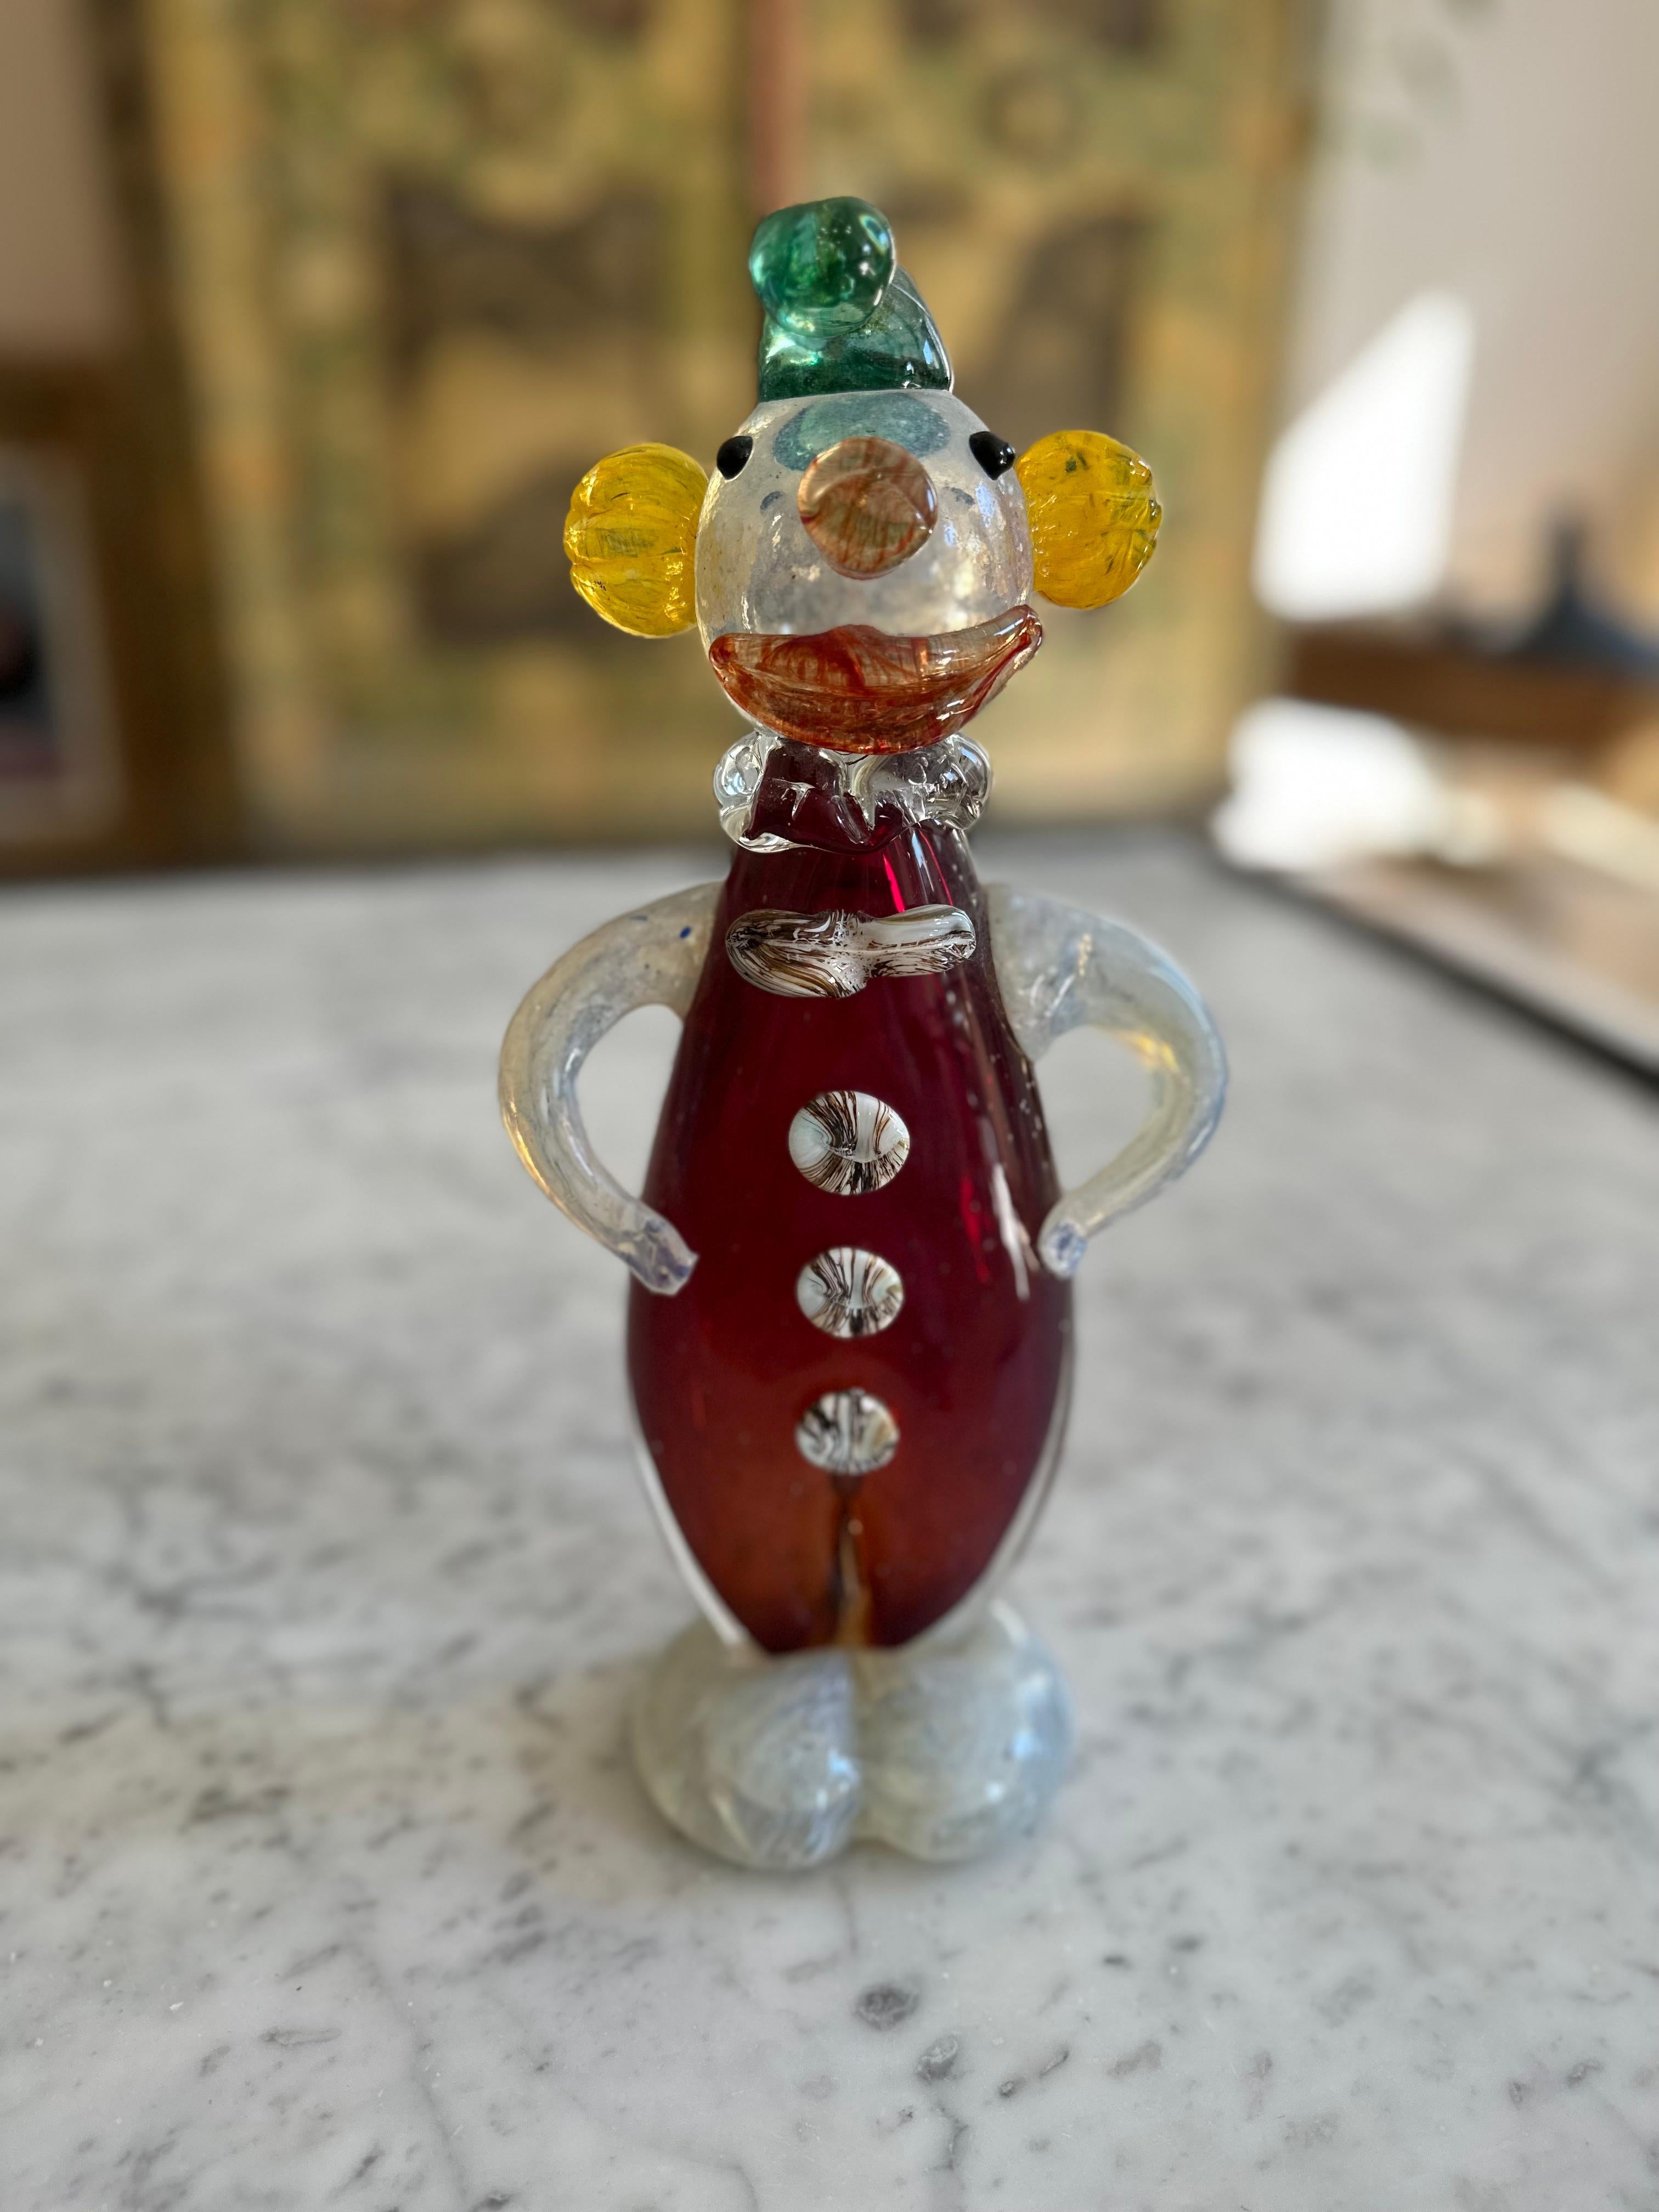 Introducing a delightful piece of artistry, this Murano glass clown figurine is a testament to the exquisite craftsmanship that the island of Murano, Italy, is renowned for. Created in the latter half of the 20th century, it embodies the spirit of